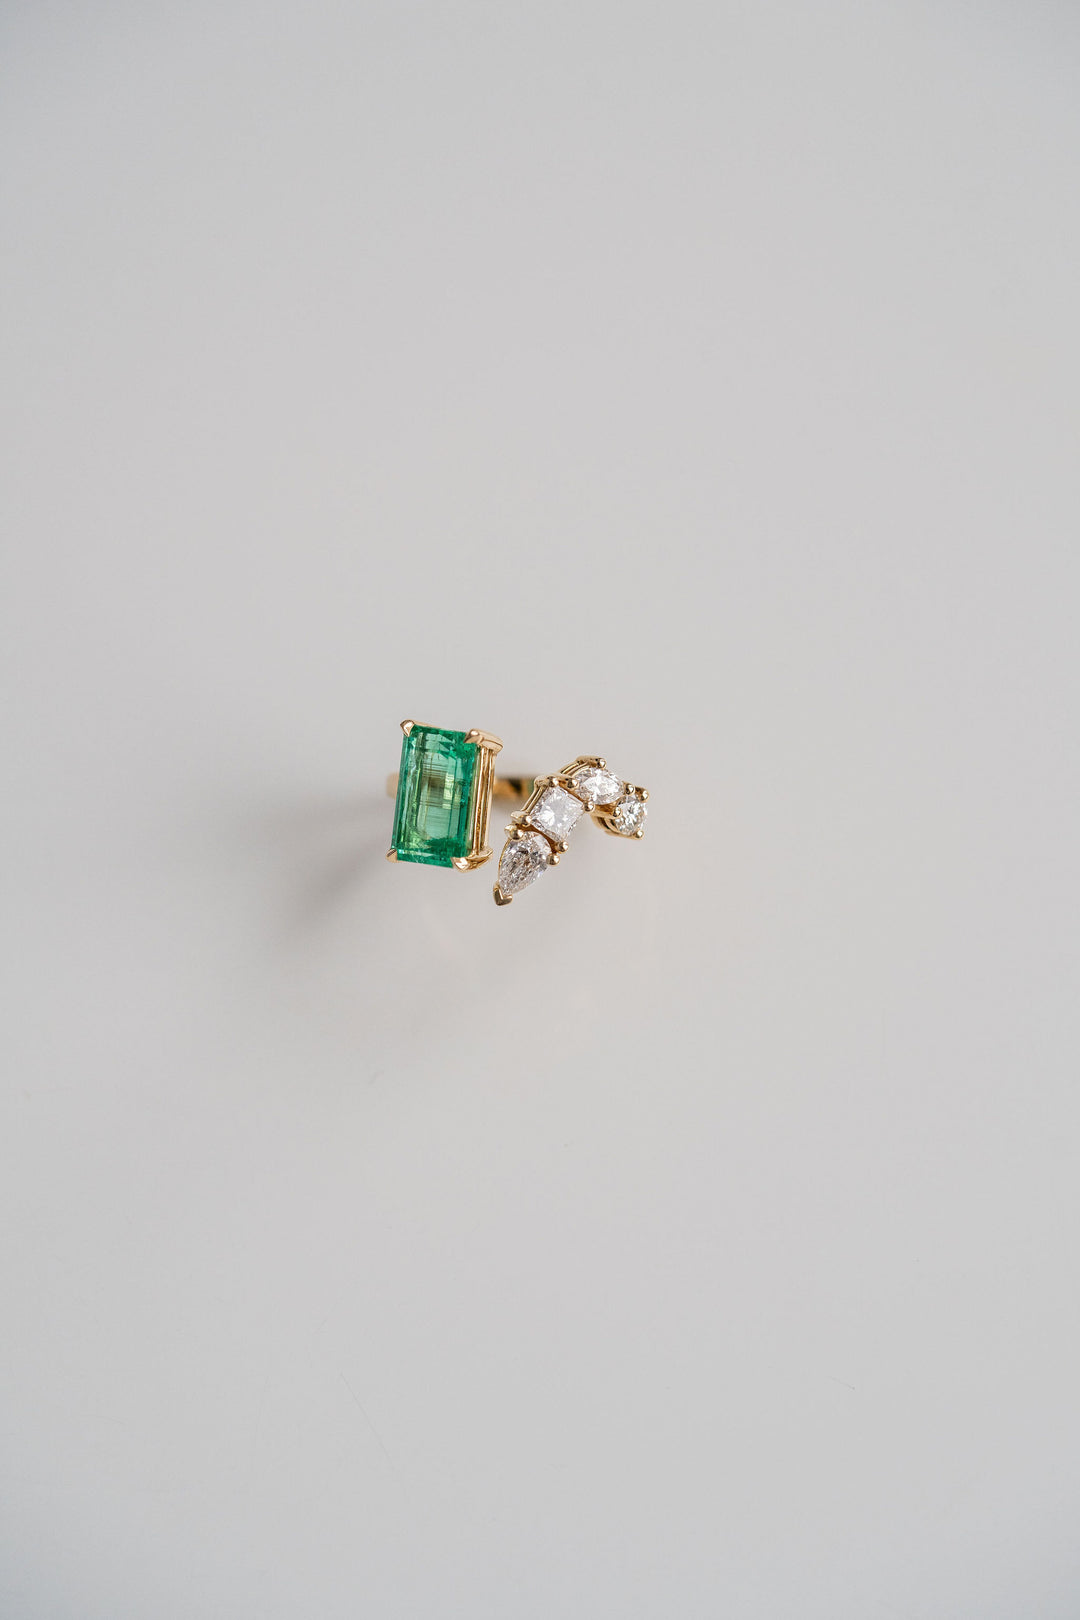 2.65ct. Emerald Cut Colombian Emerald Gap Style Cocktail Ring With Diamonds, 14k Yellow Gold 